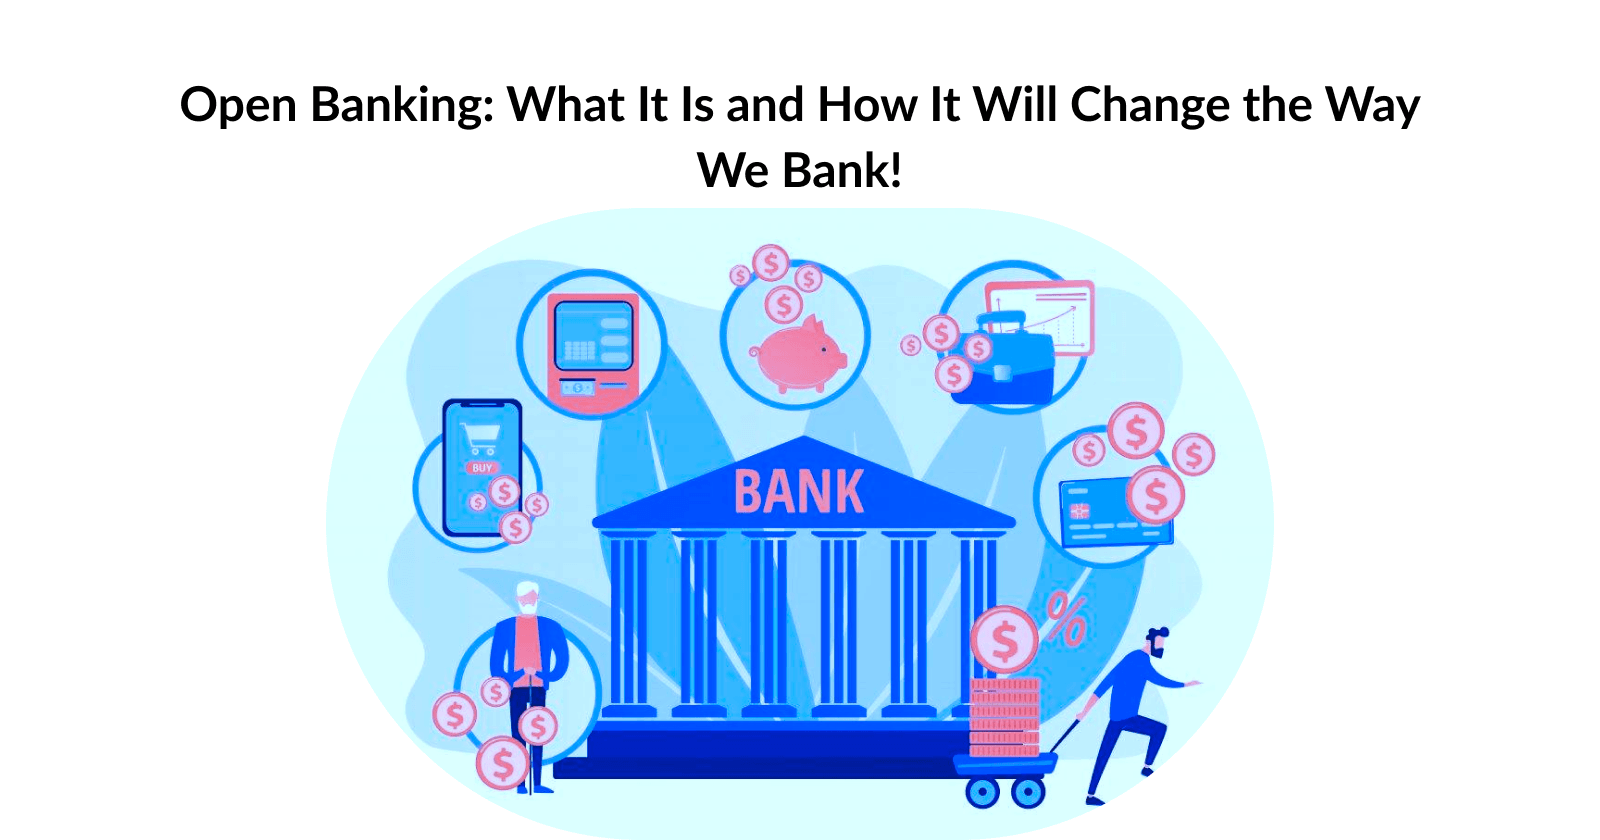 Open Banking: What It Is and How It Will Change the Way We Bank!